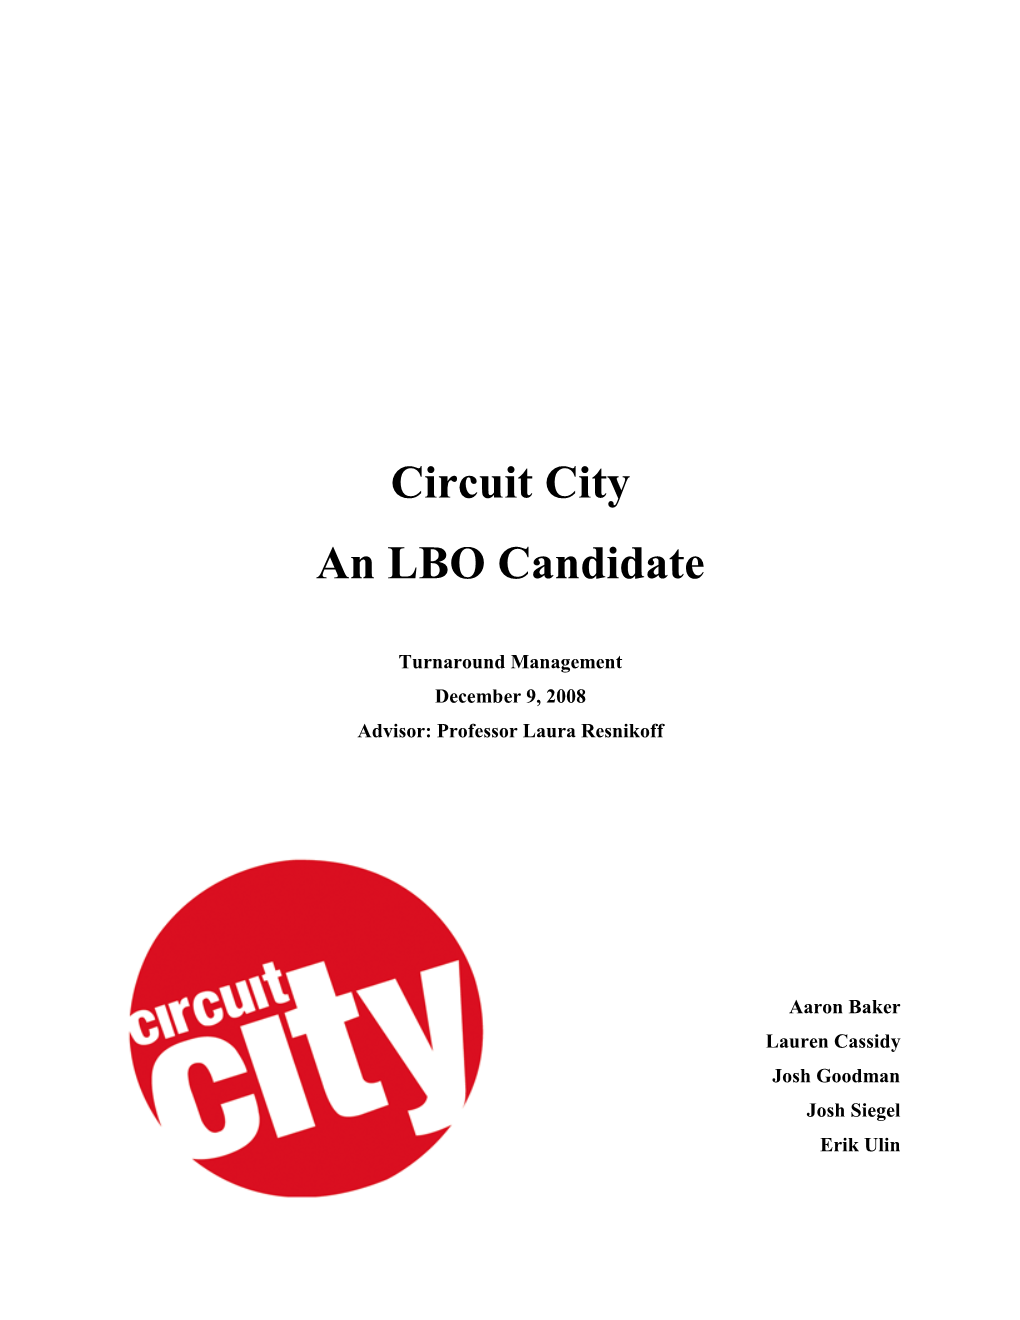 Circuit City an LBO Candidate